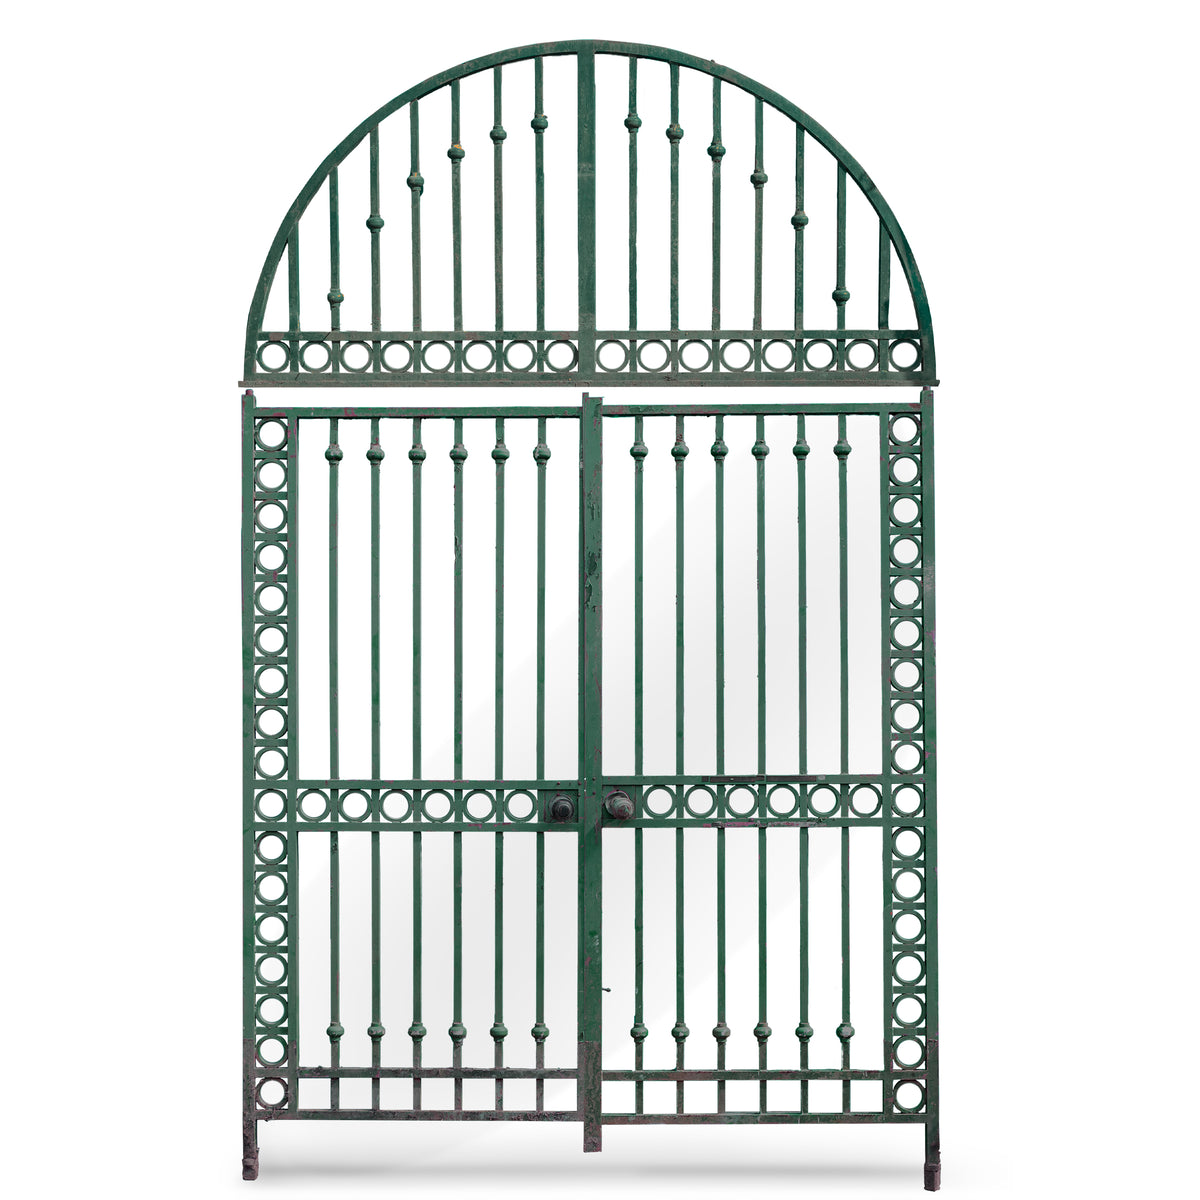 Antique Art Deco Iron Gates with Optional Arched Crest (2 Pairs Available) | The Architectural Forum